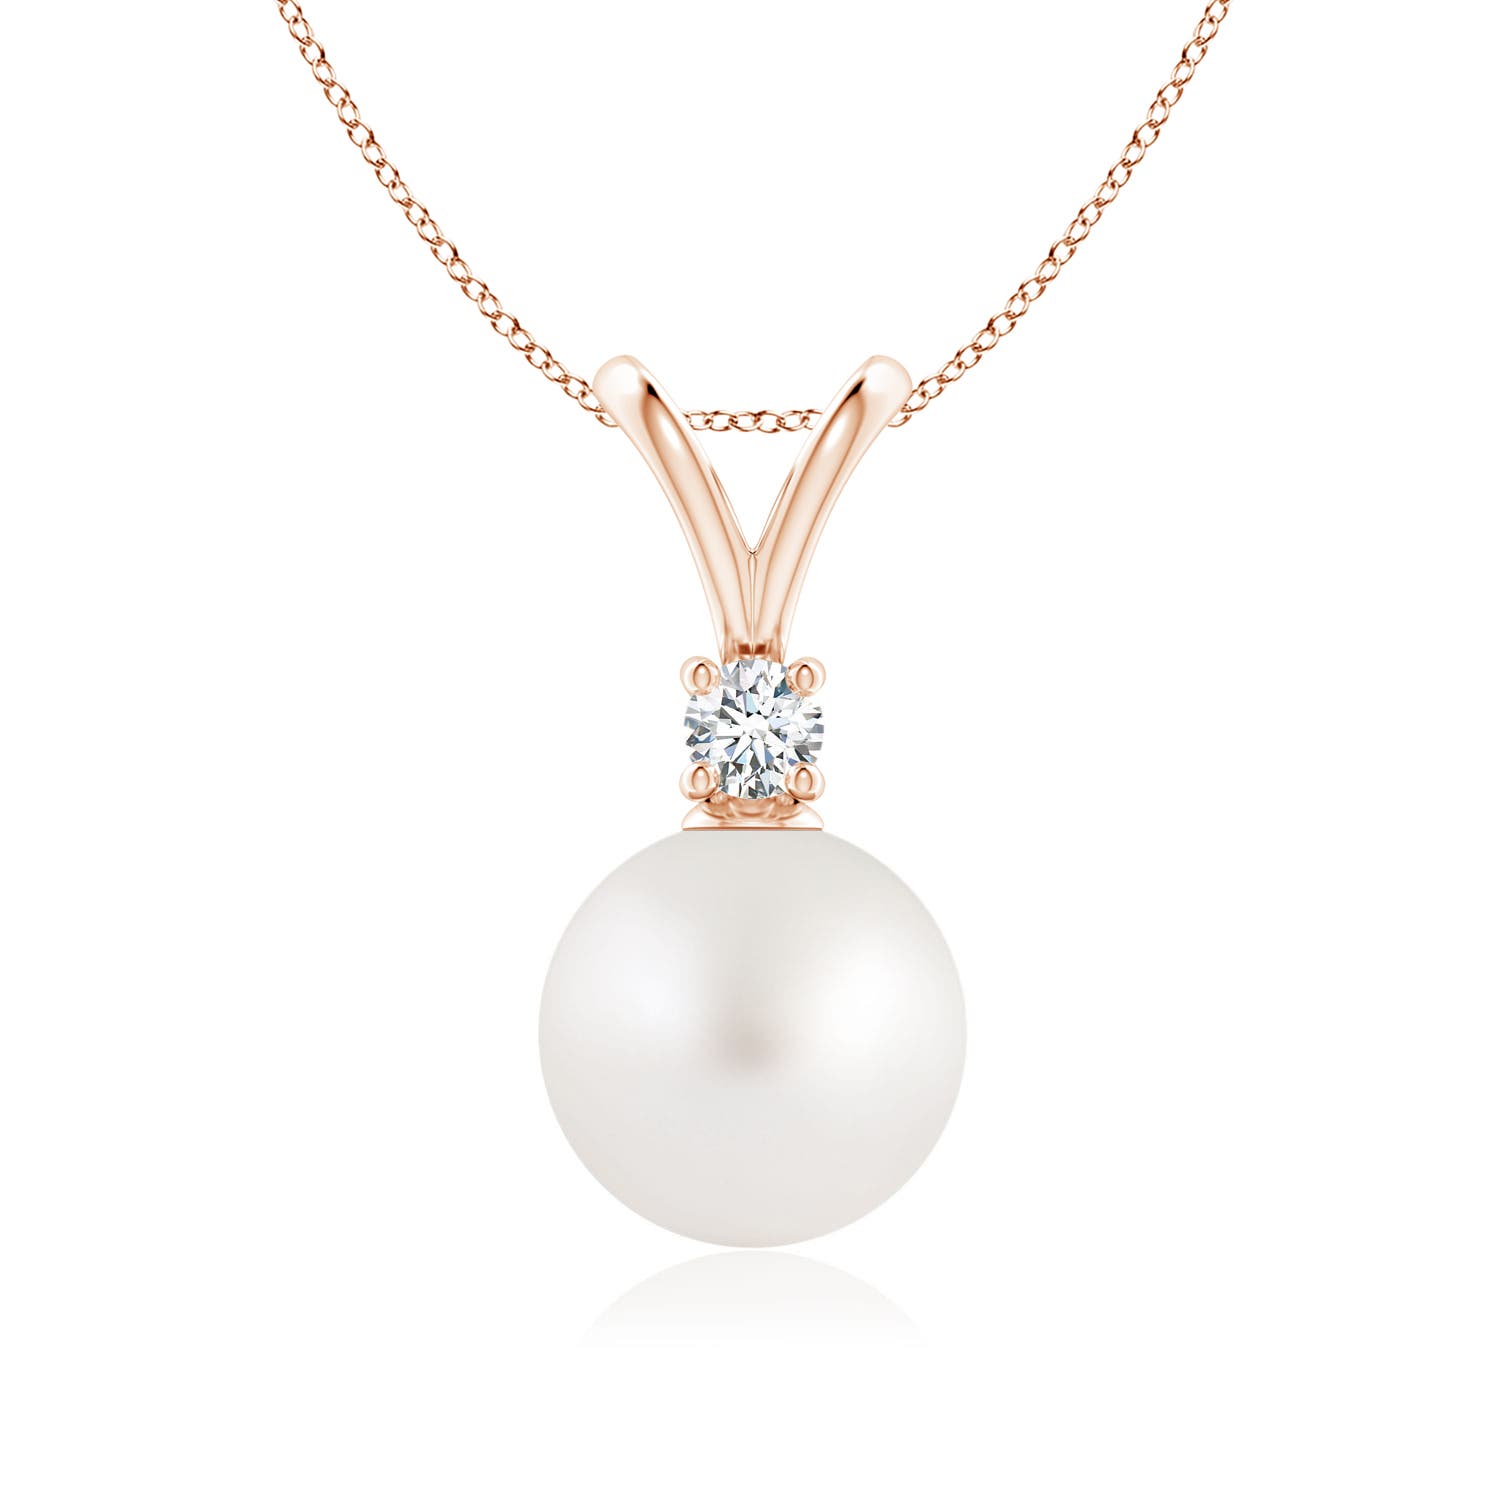 AA - South Sea Cultured Pearl / 5.36 CT / 14 KT Rose Gold